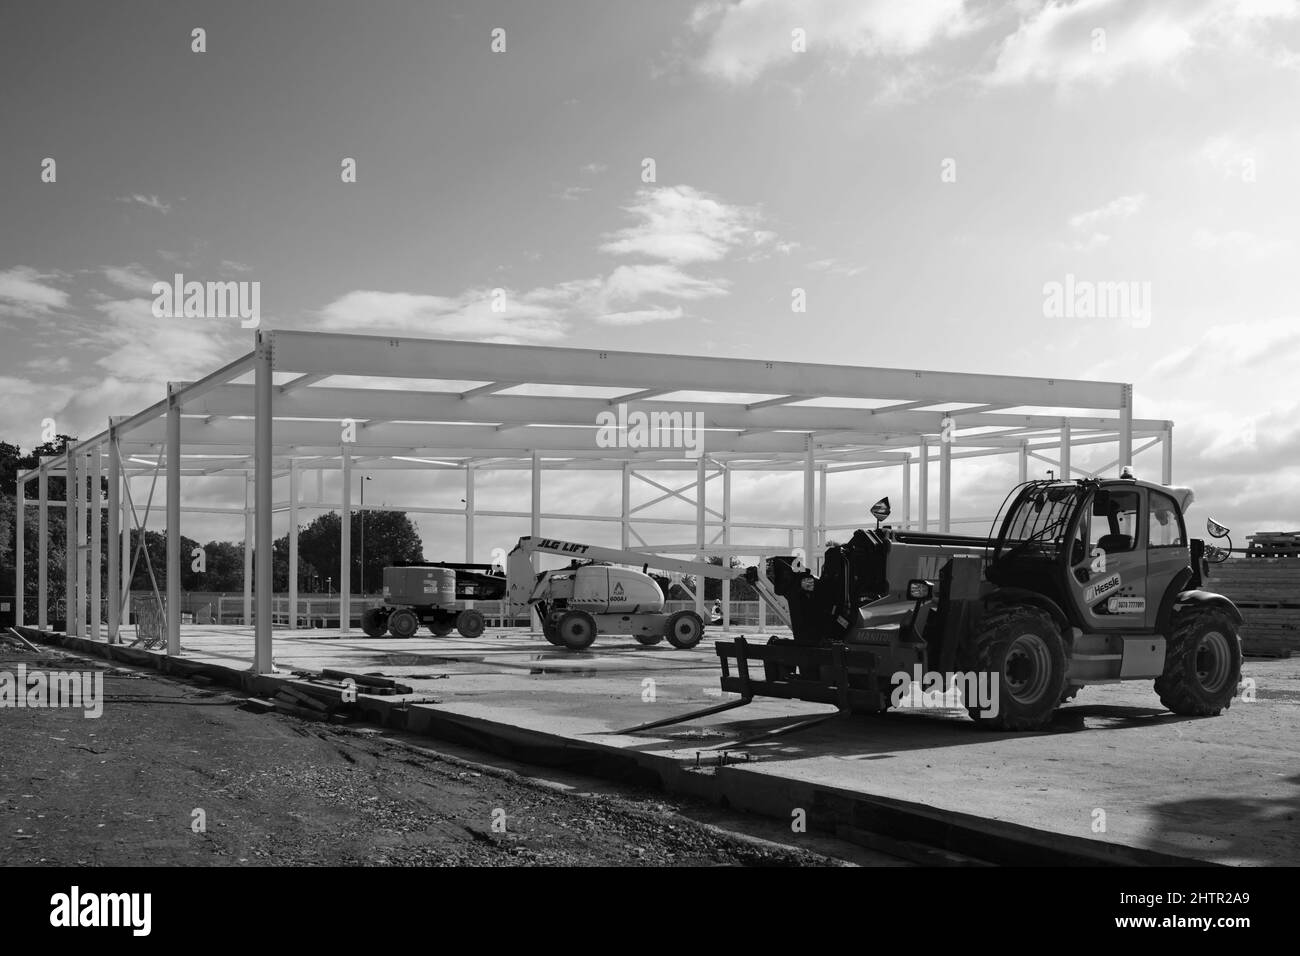 Modern supermarket being constructed by usig steel framework using large machinery on fine day in Beverley, UK. Stock Photo